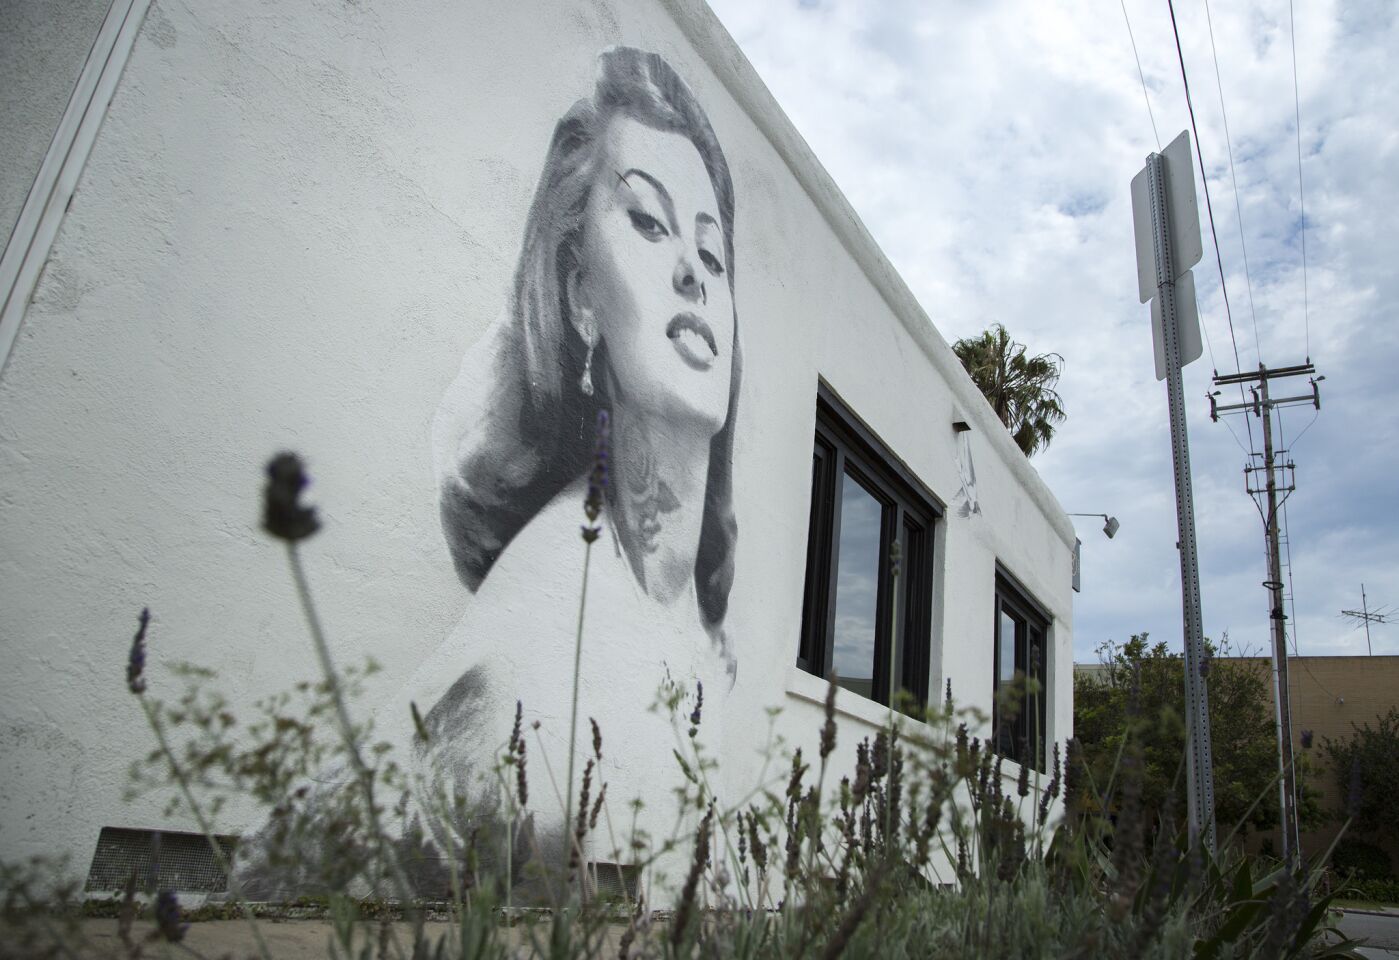 A portrait of Italian actress Sophia Loren is painted on a wall at Felix Trattoria in Venice.